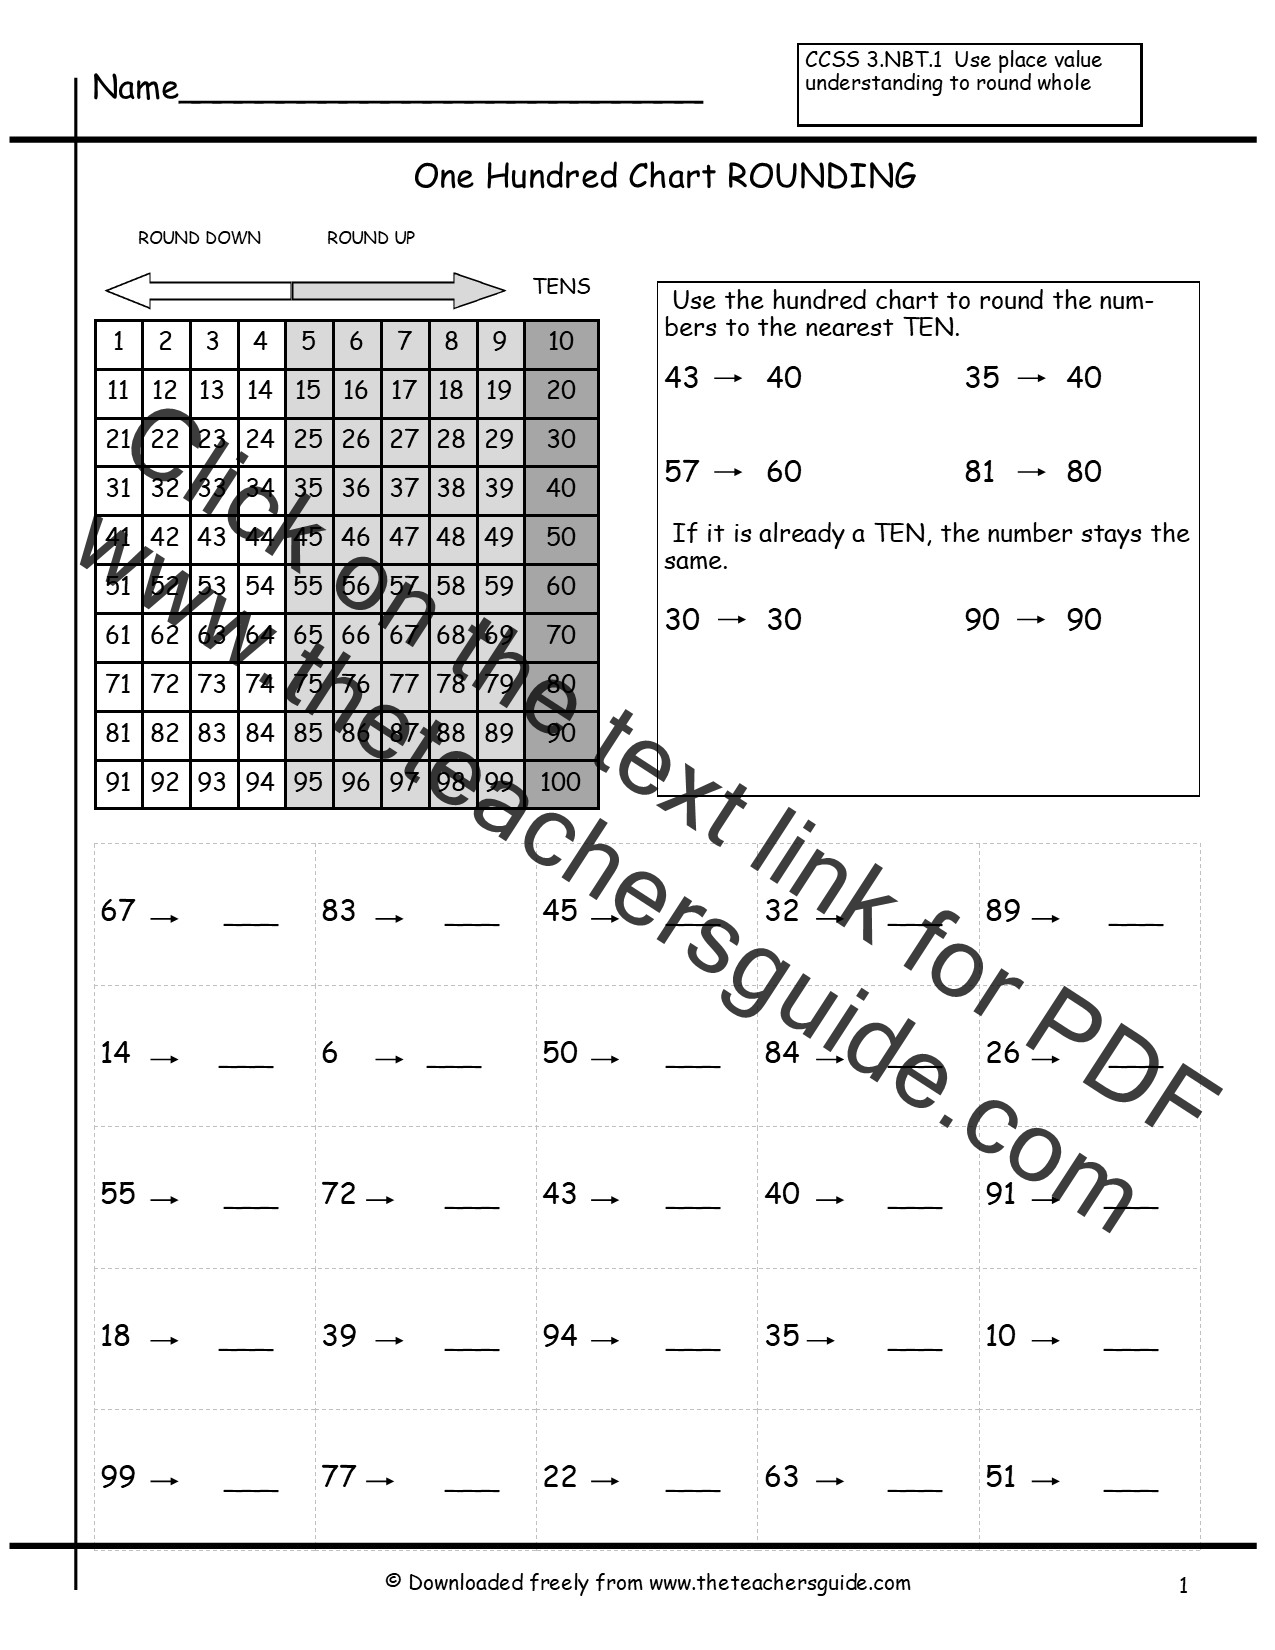 Rounding Whole Numbers Worksheets From The Teacher s Guide